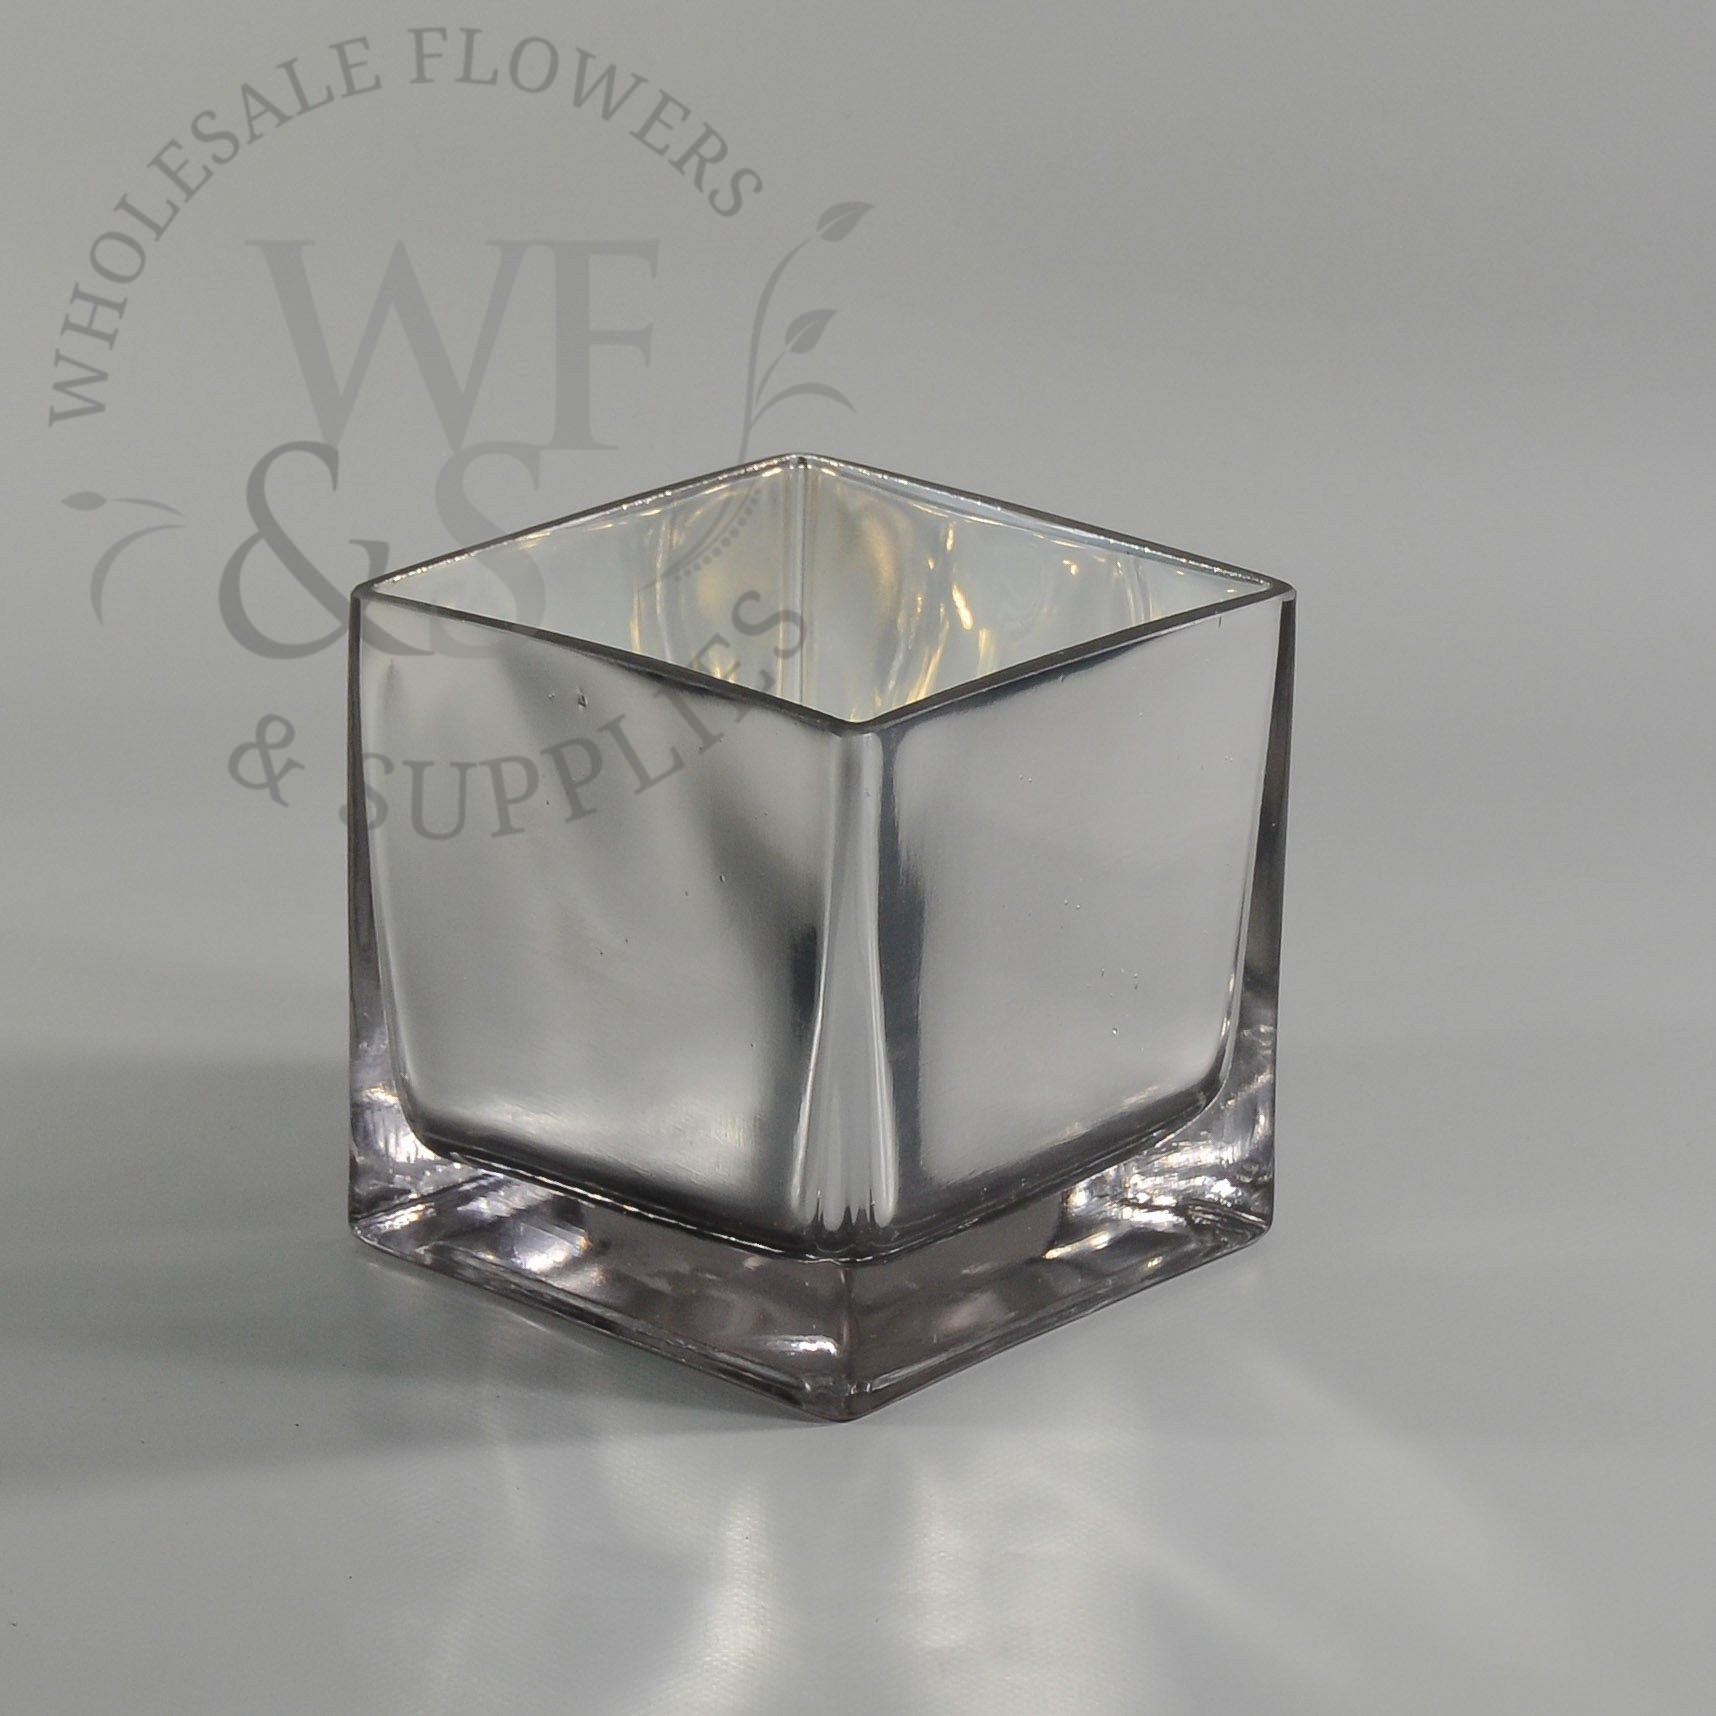 19 Fantastic Small Crystal Vase 2022 free download small crystal vase of 13 fresh silver mirror vase bogekompresorturkiye com for crystal mirror inspirational mirror vase 8 1h vases mirrored square cube riser inch squarei 0d uk